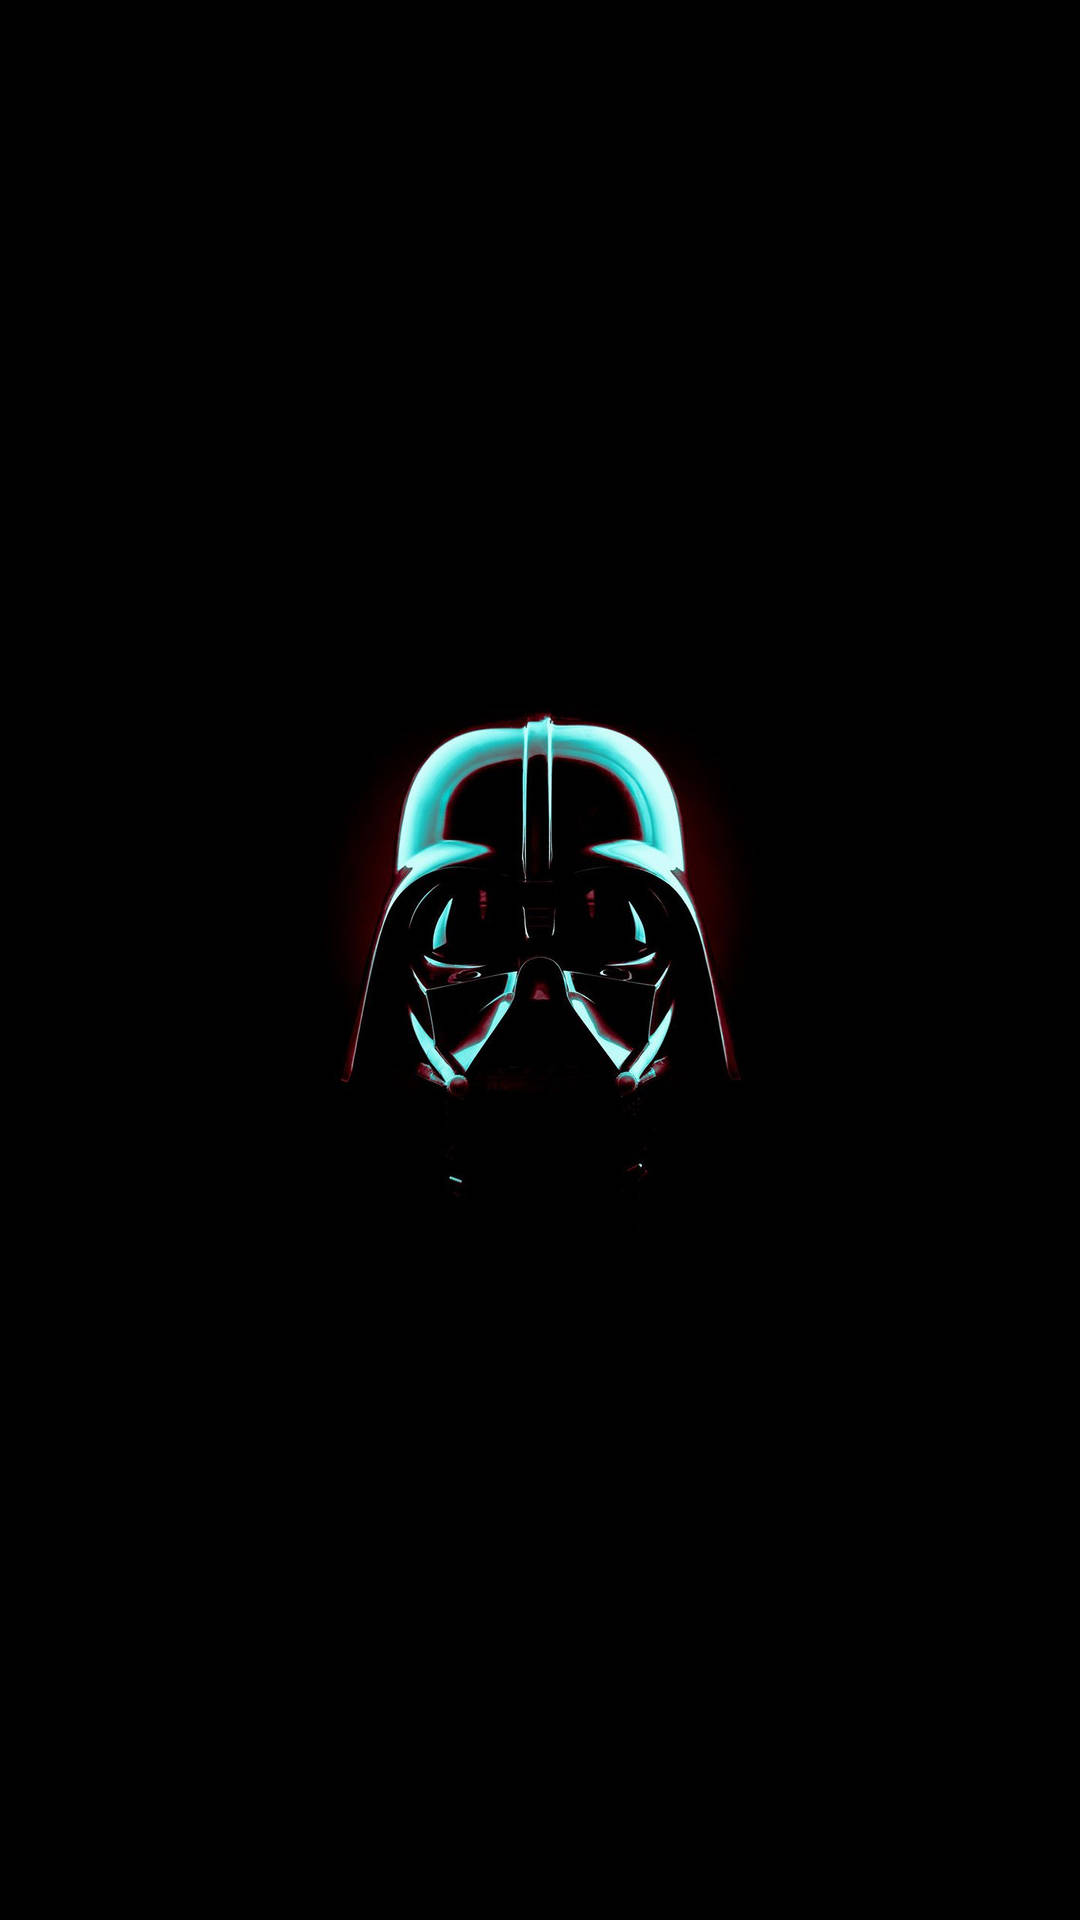 Unleash your dark side with AMOLED technology Wallpaper